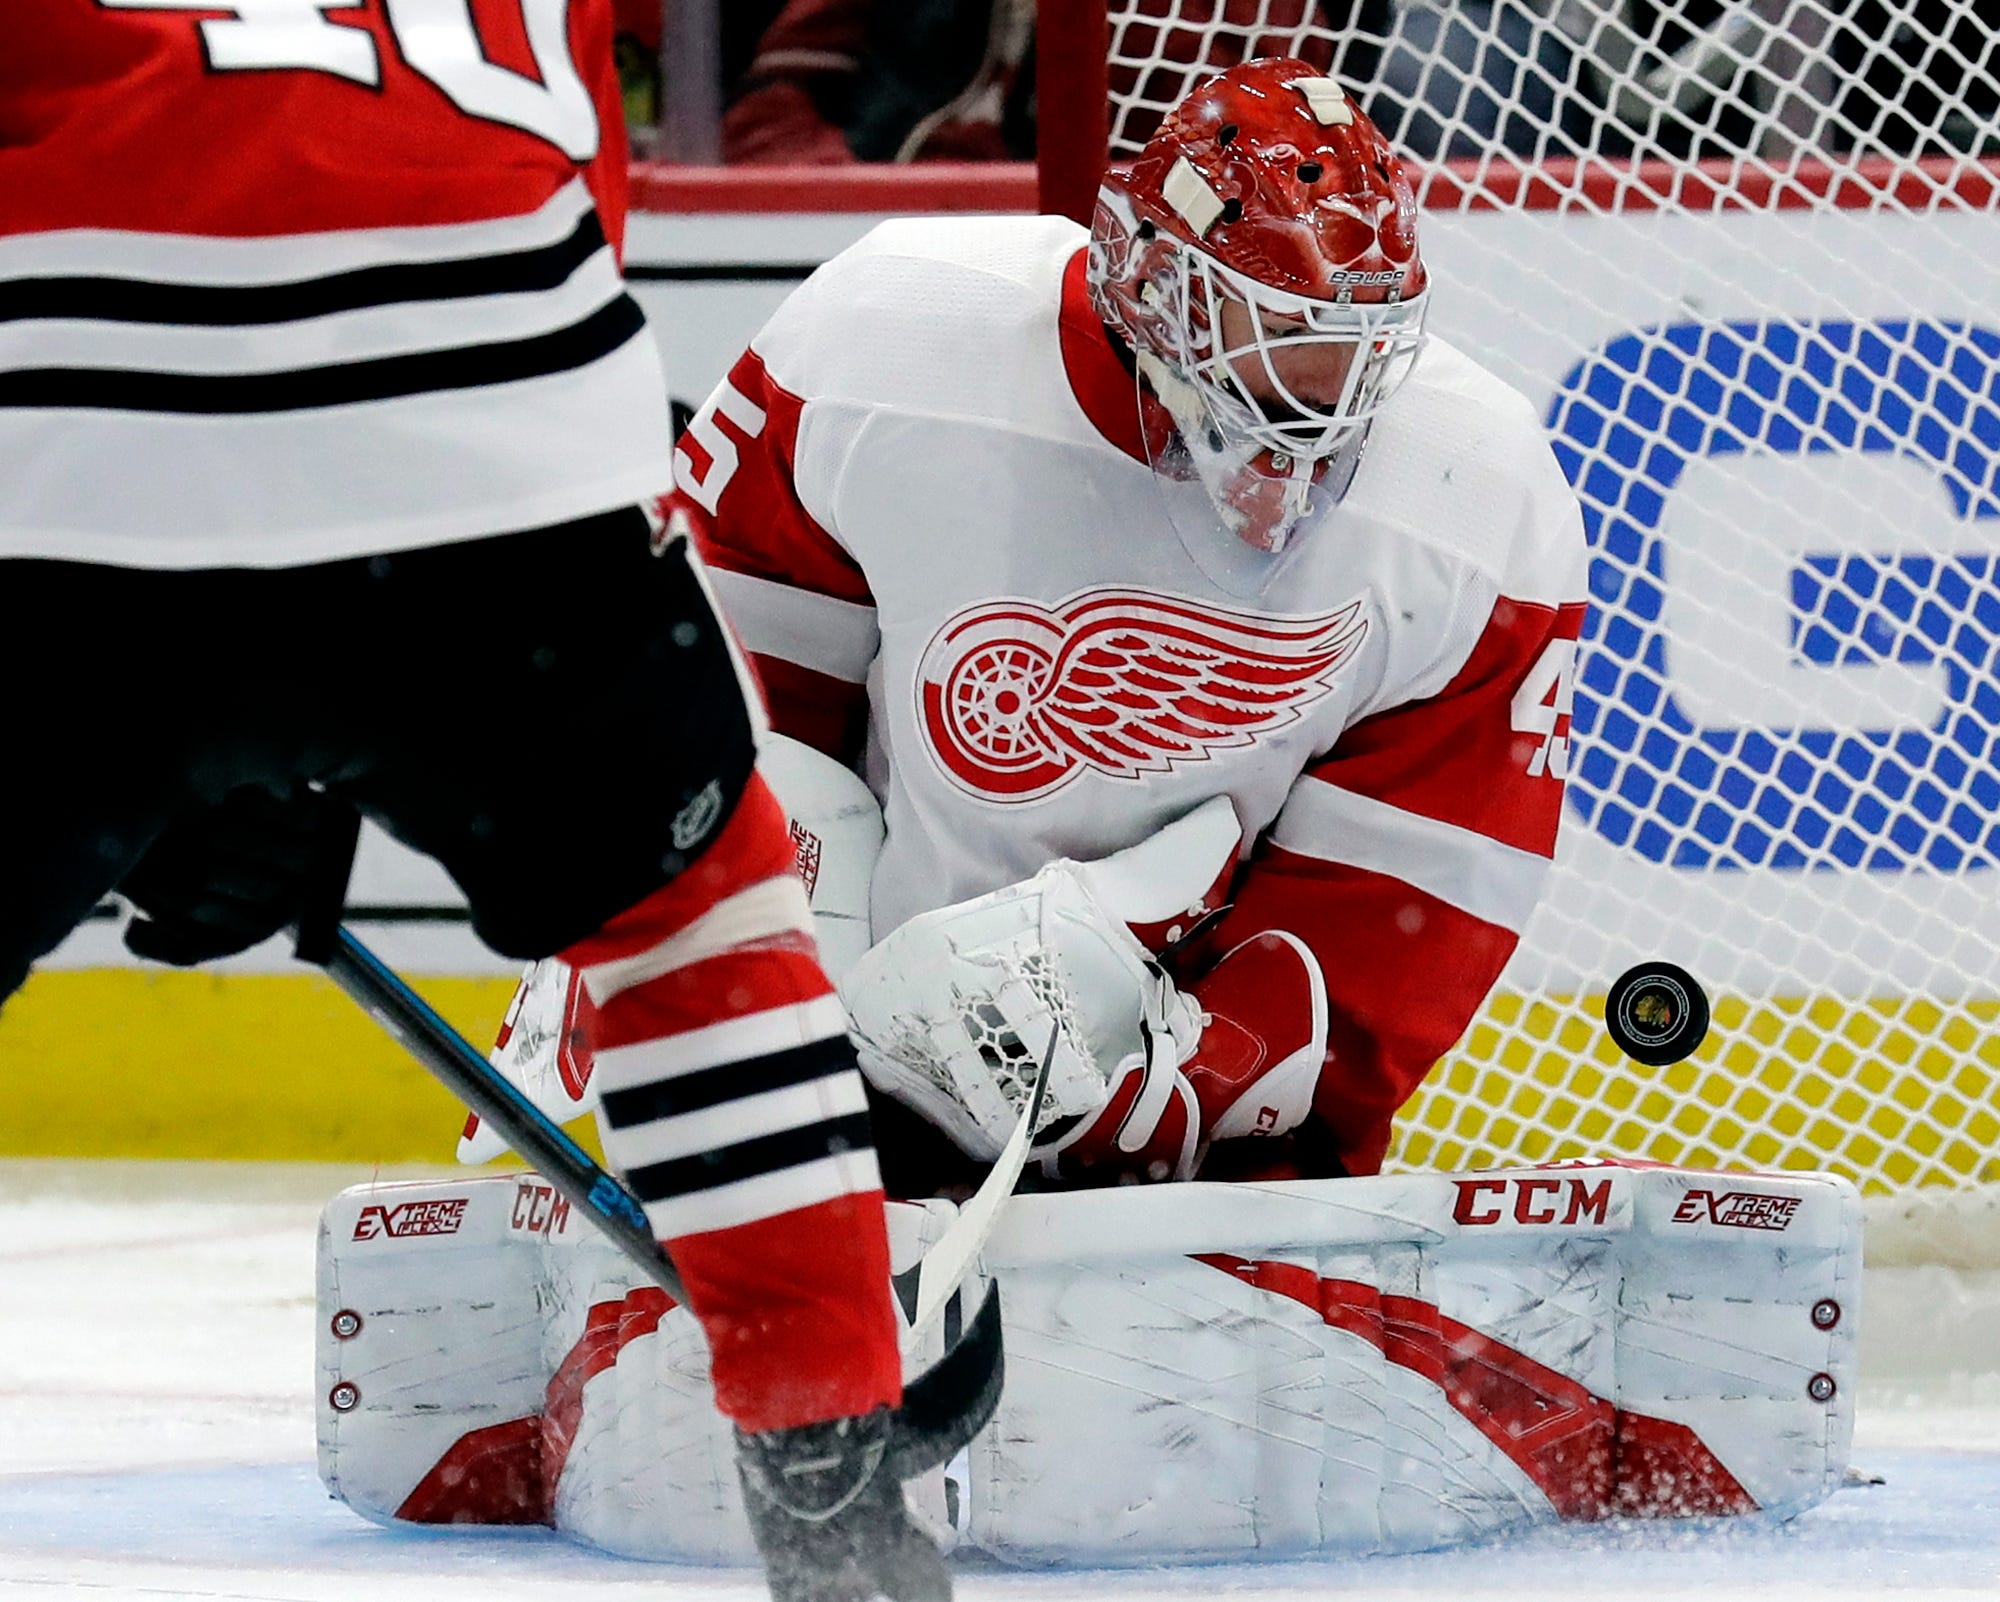 Detroit Red Wings goalie Jonathan Bernier blocks a shot against the Chicago Blackhawks during the second period of an NHL hockey game Sunday, Feb. 10, 2019, in Chicago.  Detroit lost to Chicago 5-2